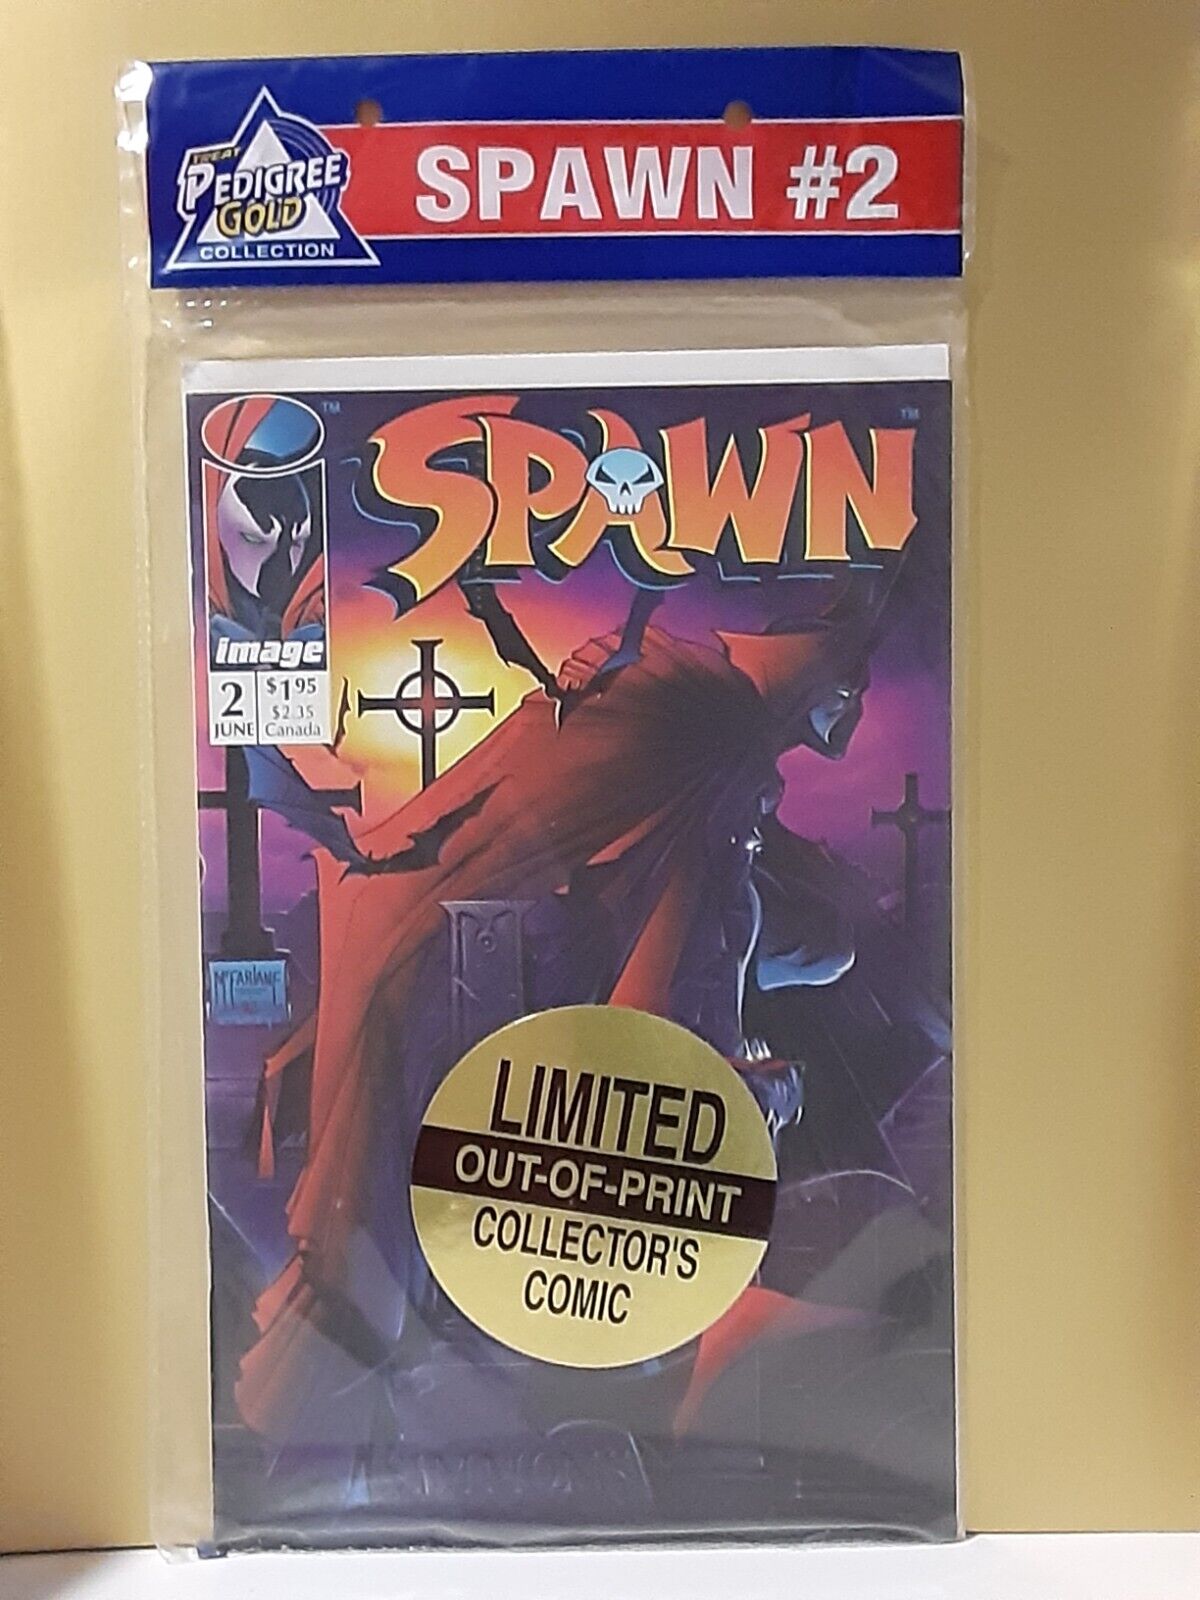 SPAWN #2 IMAGE PEDIGREE GOLD COLLECTION LIMITED FACTORY SEALED BAG MINT